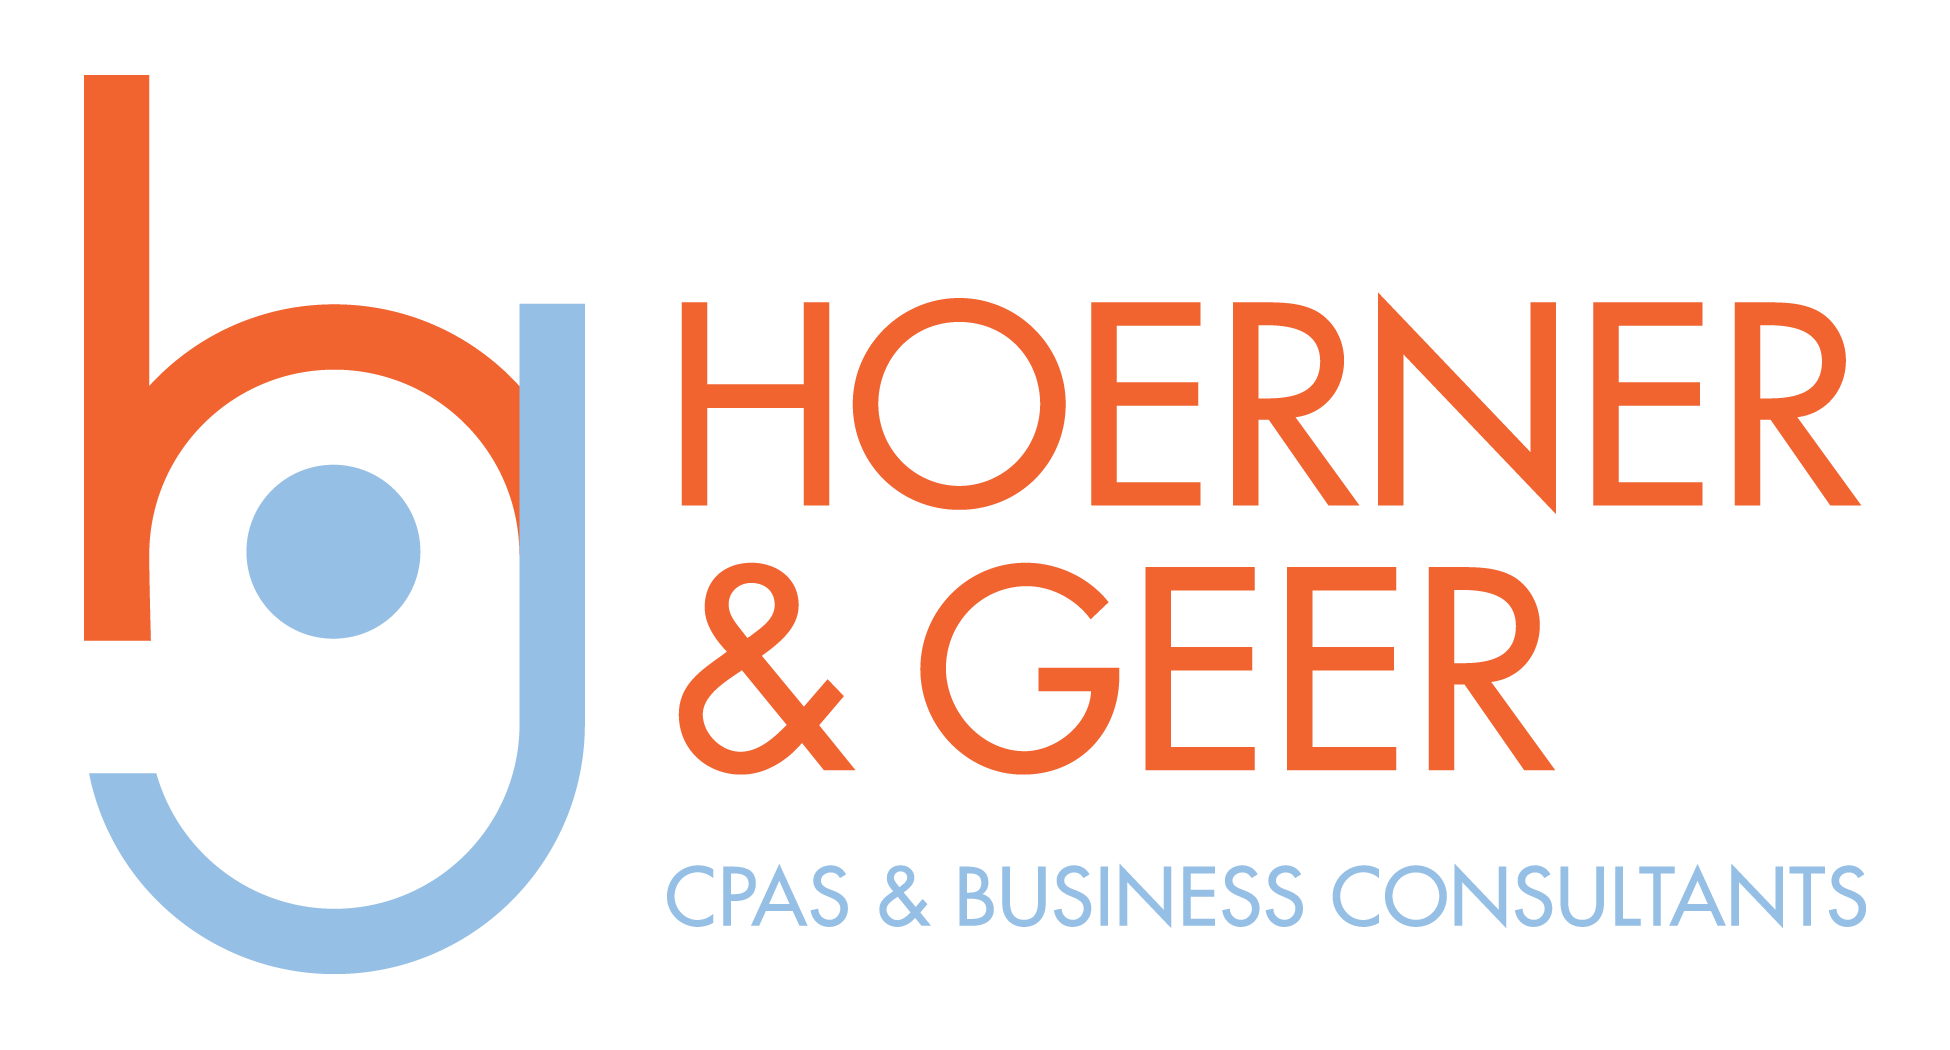 Geer Logo - Hoerner & Geer CPA's Business Consultants | Our success is a result ...